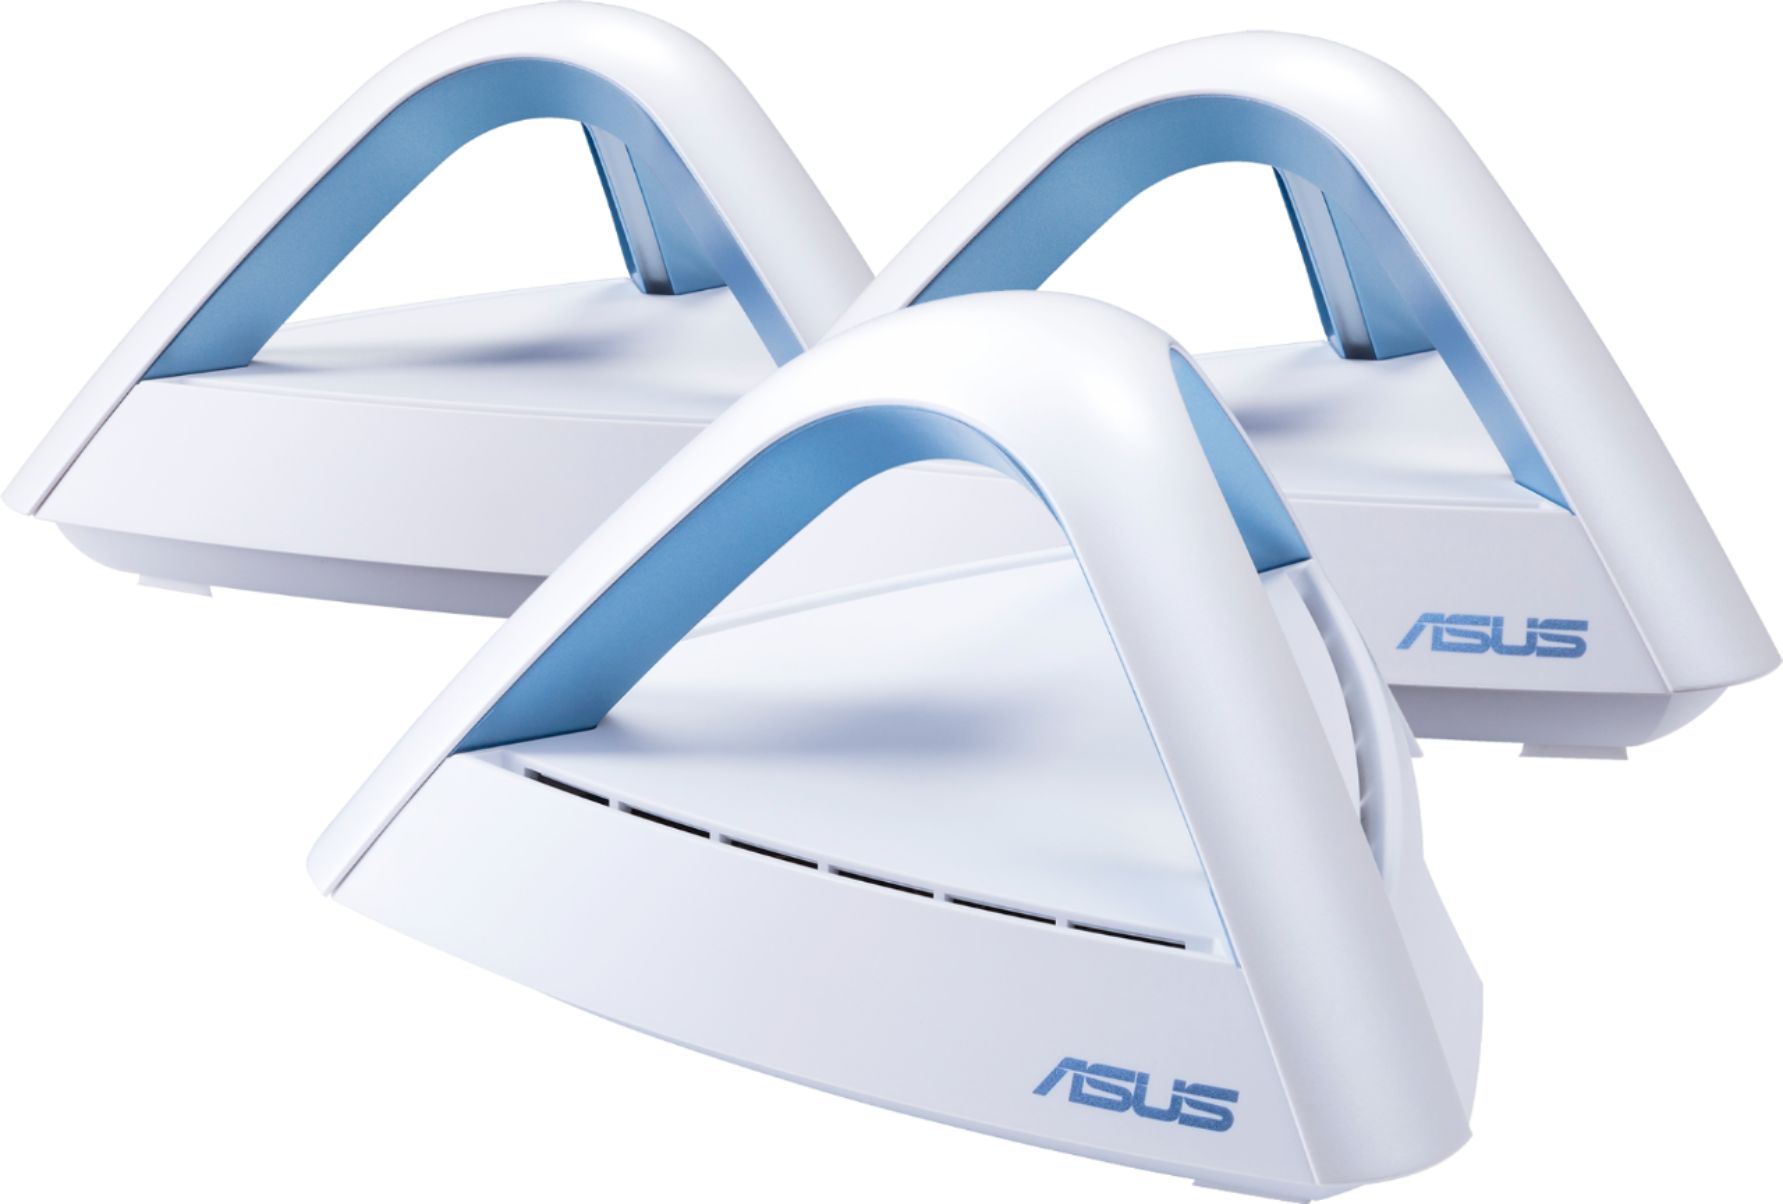 ASUS - Wireless-AC1750 Dual-Band Mesh Wi-Fi Router - Blue/White